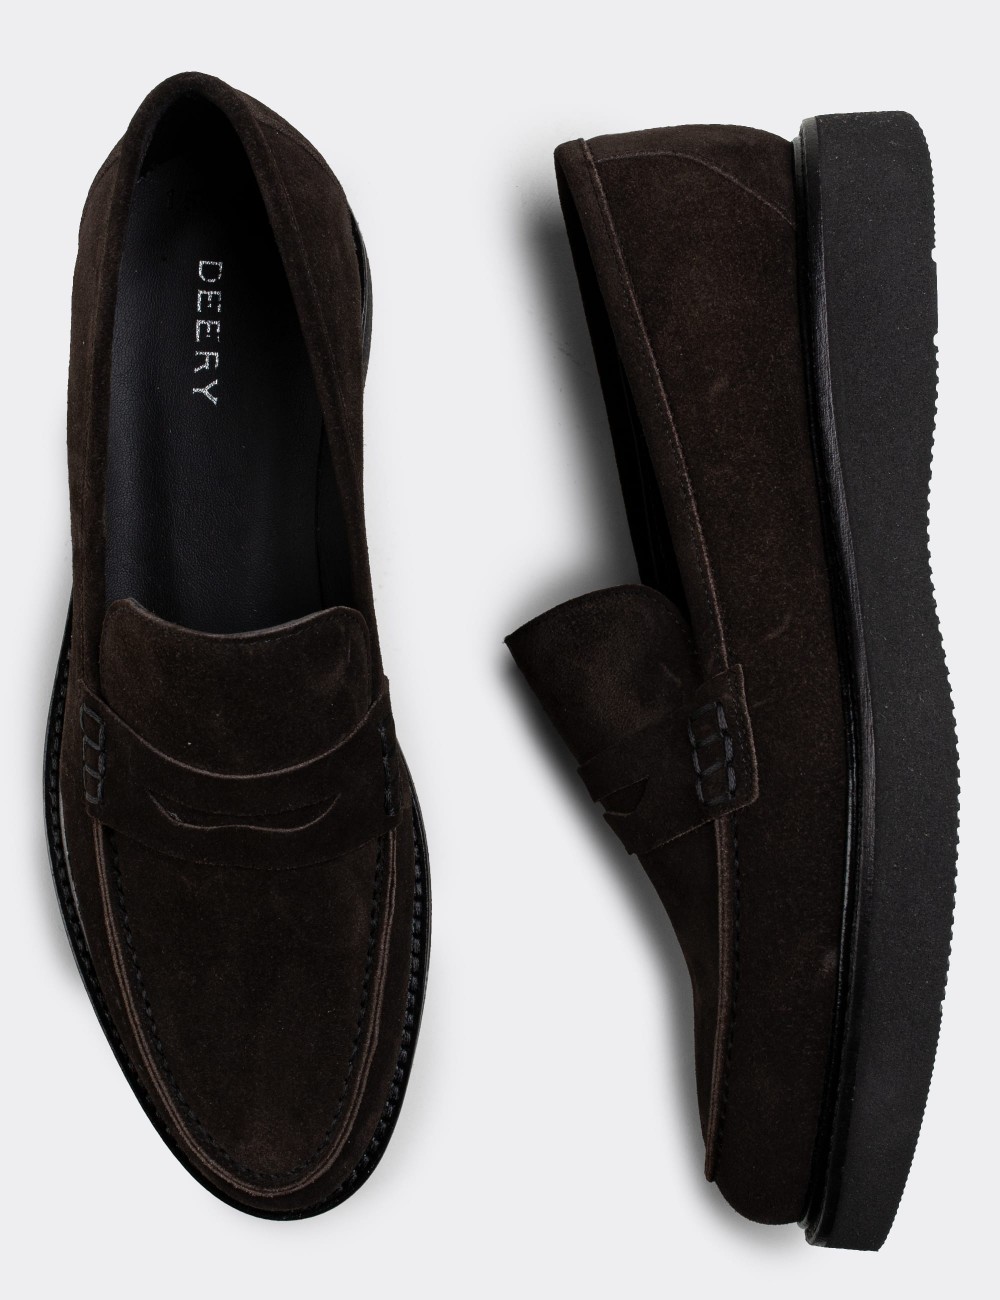 Brown Suede Leather Loafers Shoes - 01574ZKHVE01